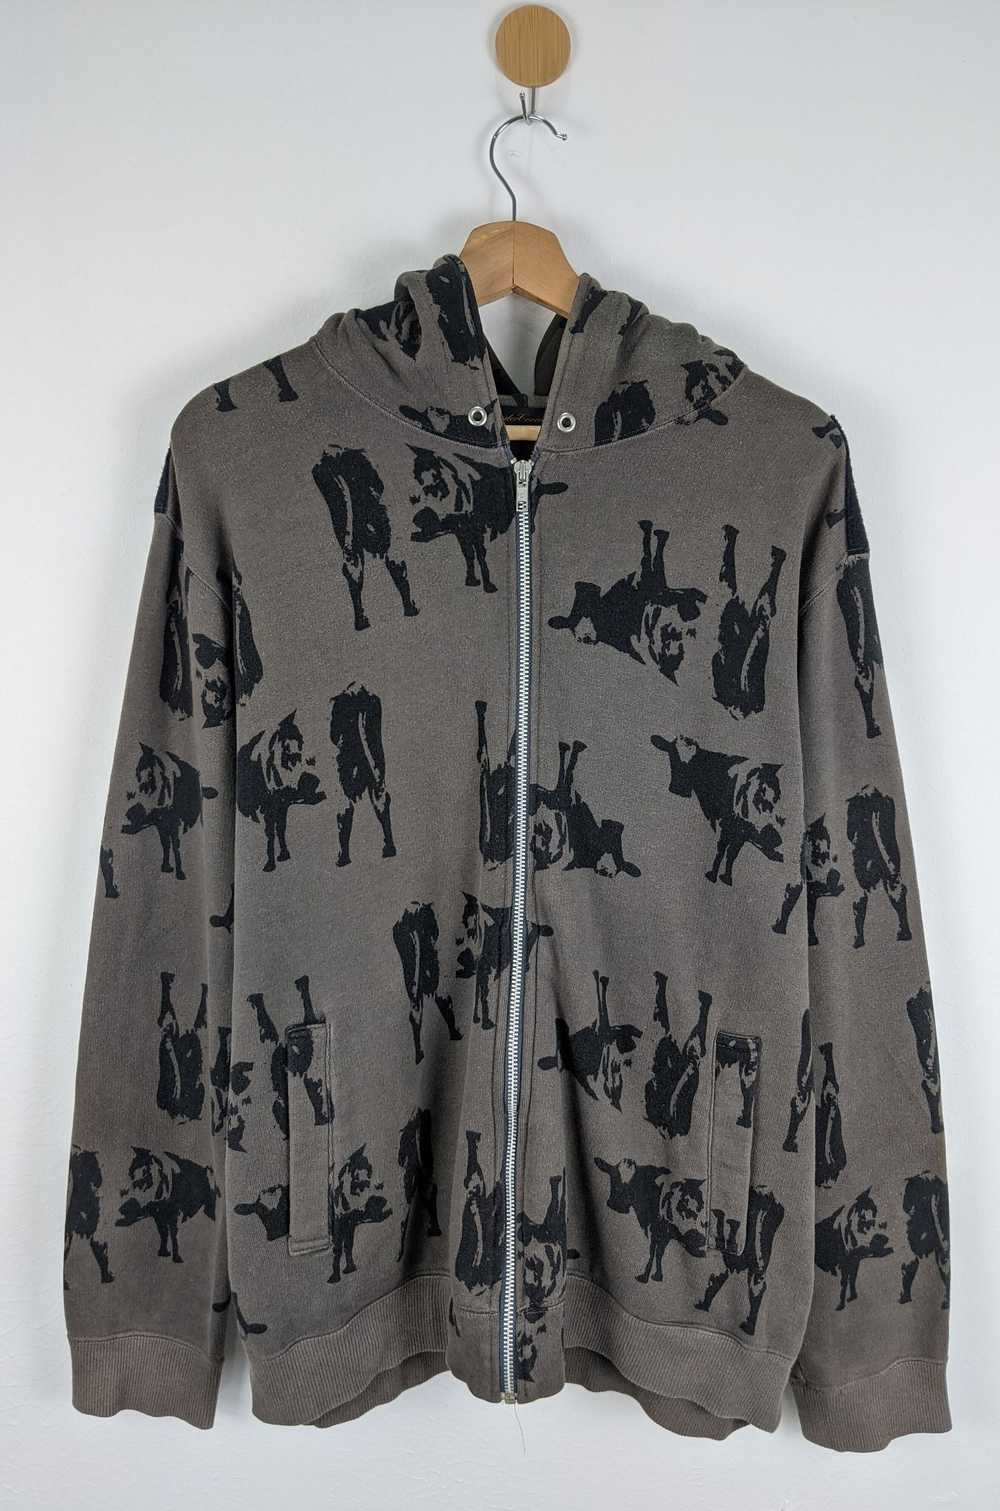 Undercover Undercover Cow Print Hoodie Sweater - image 1